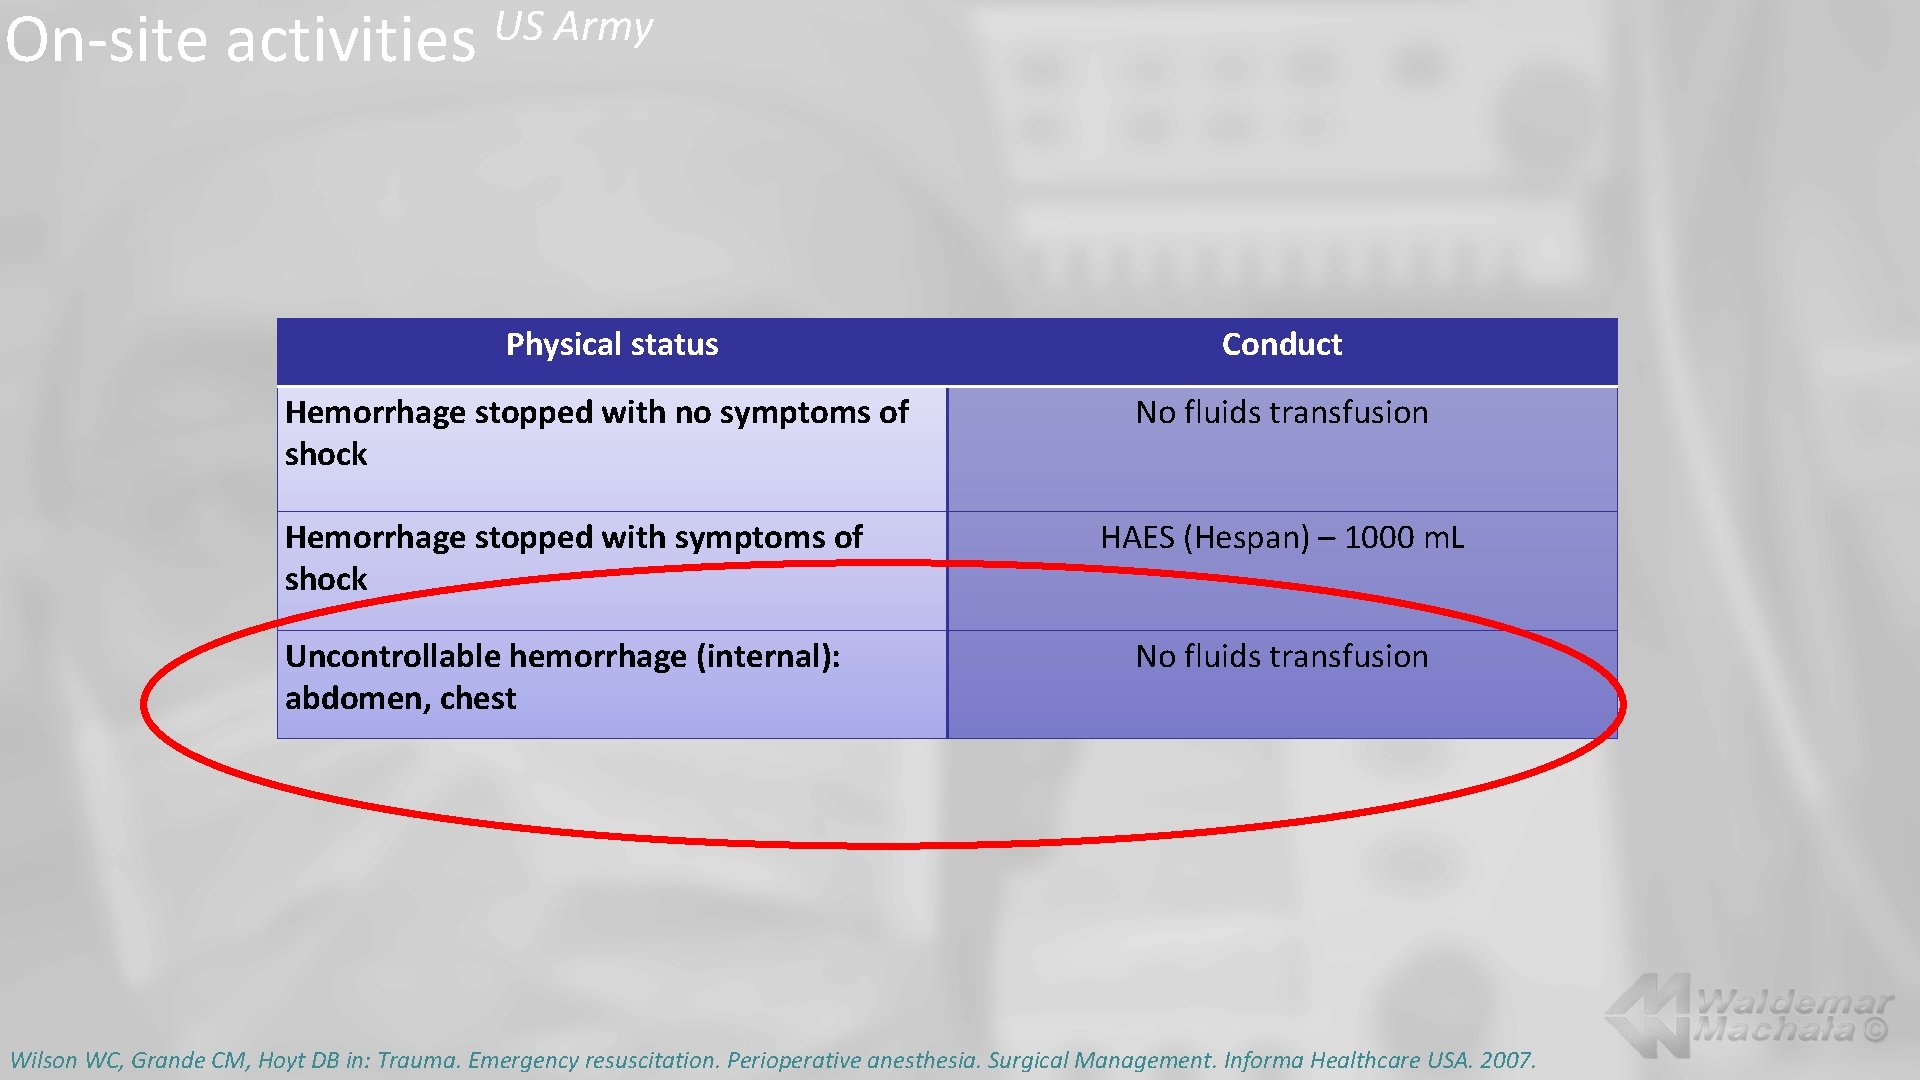 On-site activities US Army Physical status Hemorrhage stopped with no symptoms of shock Hemorrhage